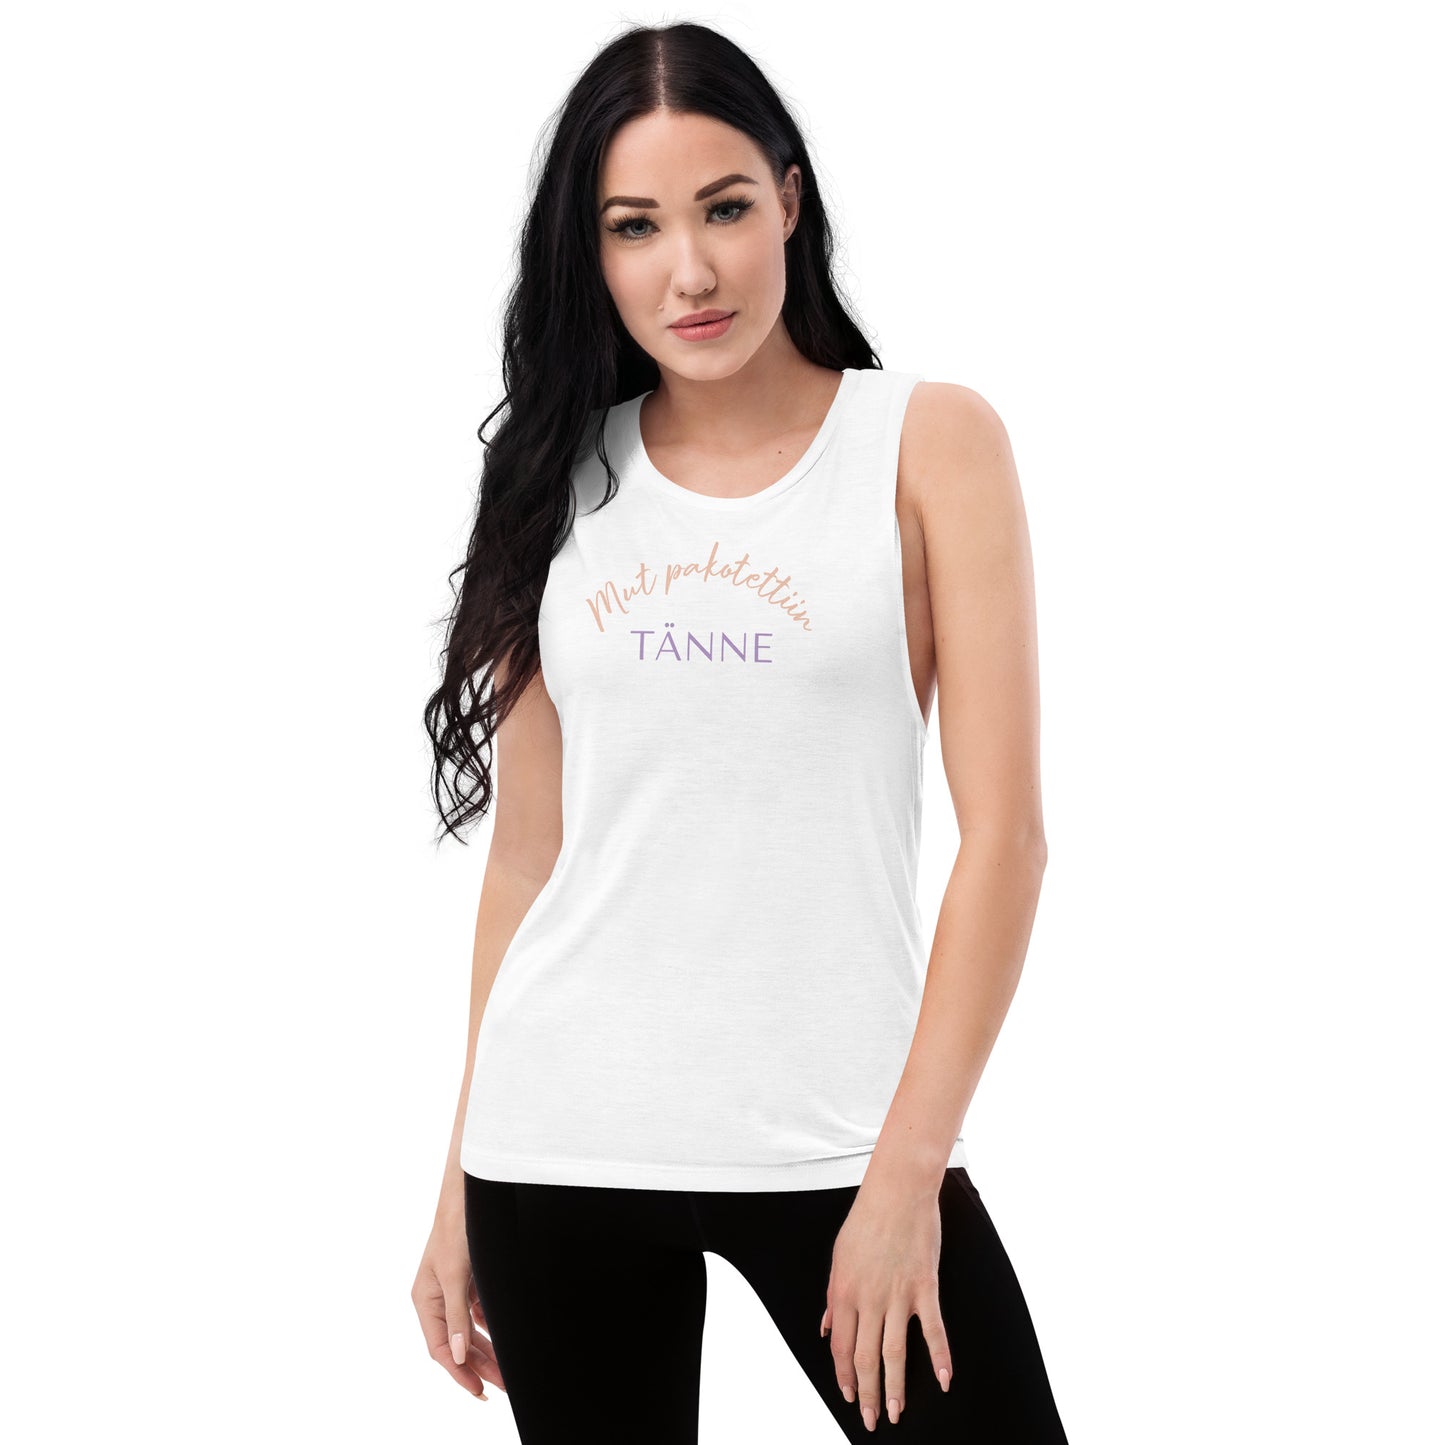 "But I was forced" women's sleeveless shirt (customer's request)